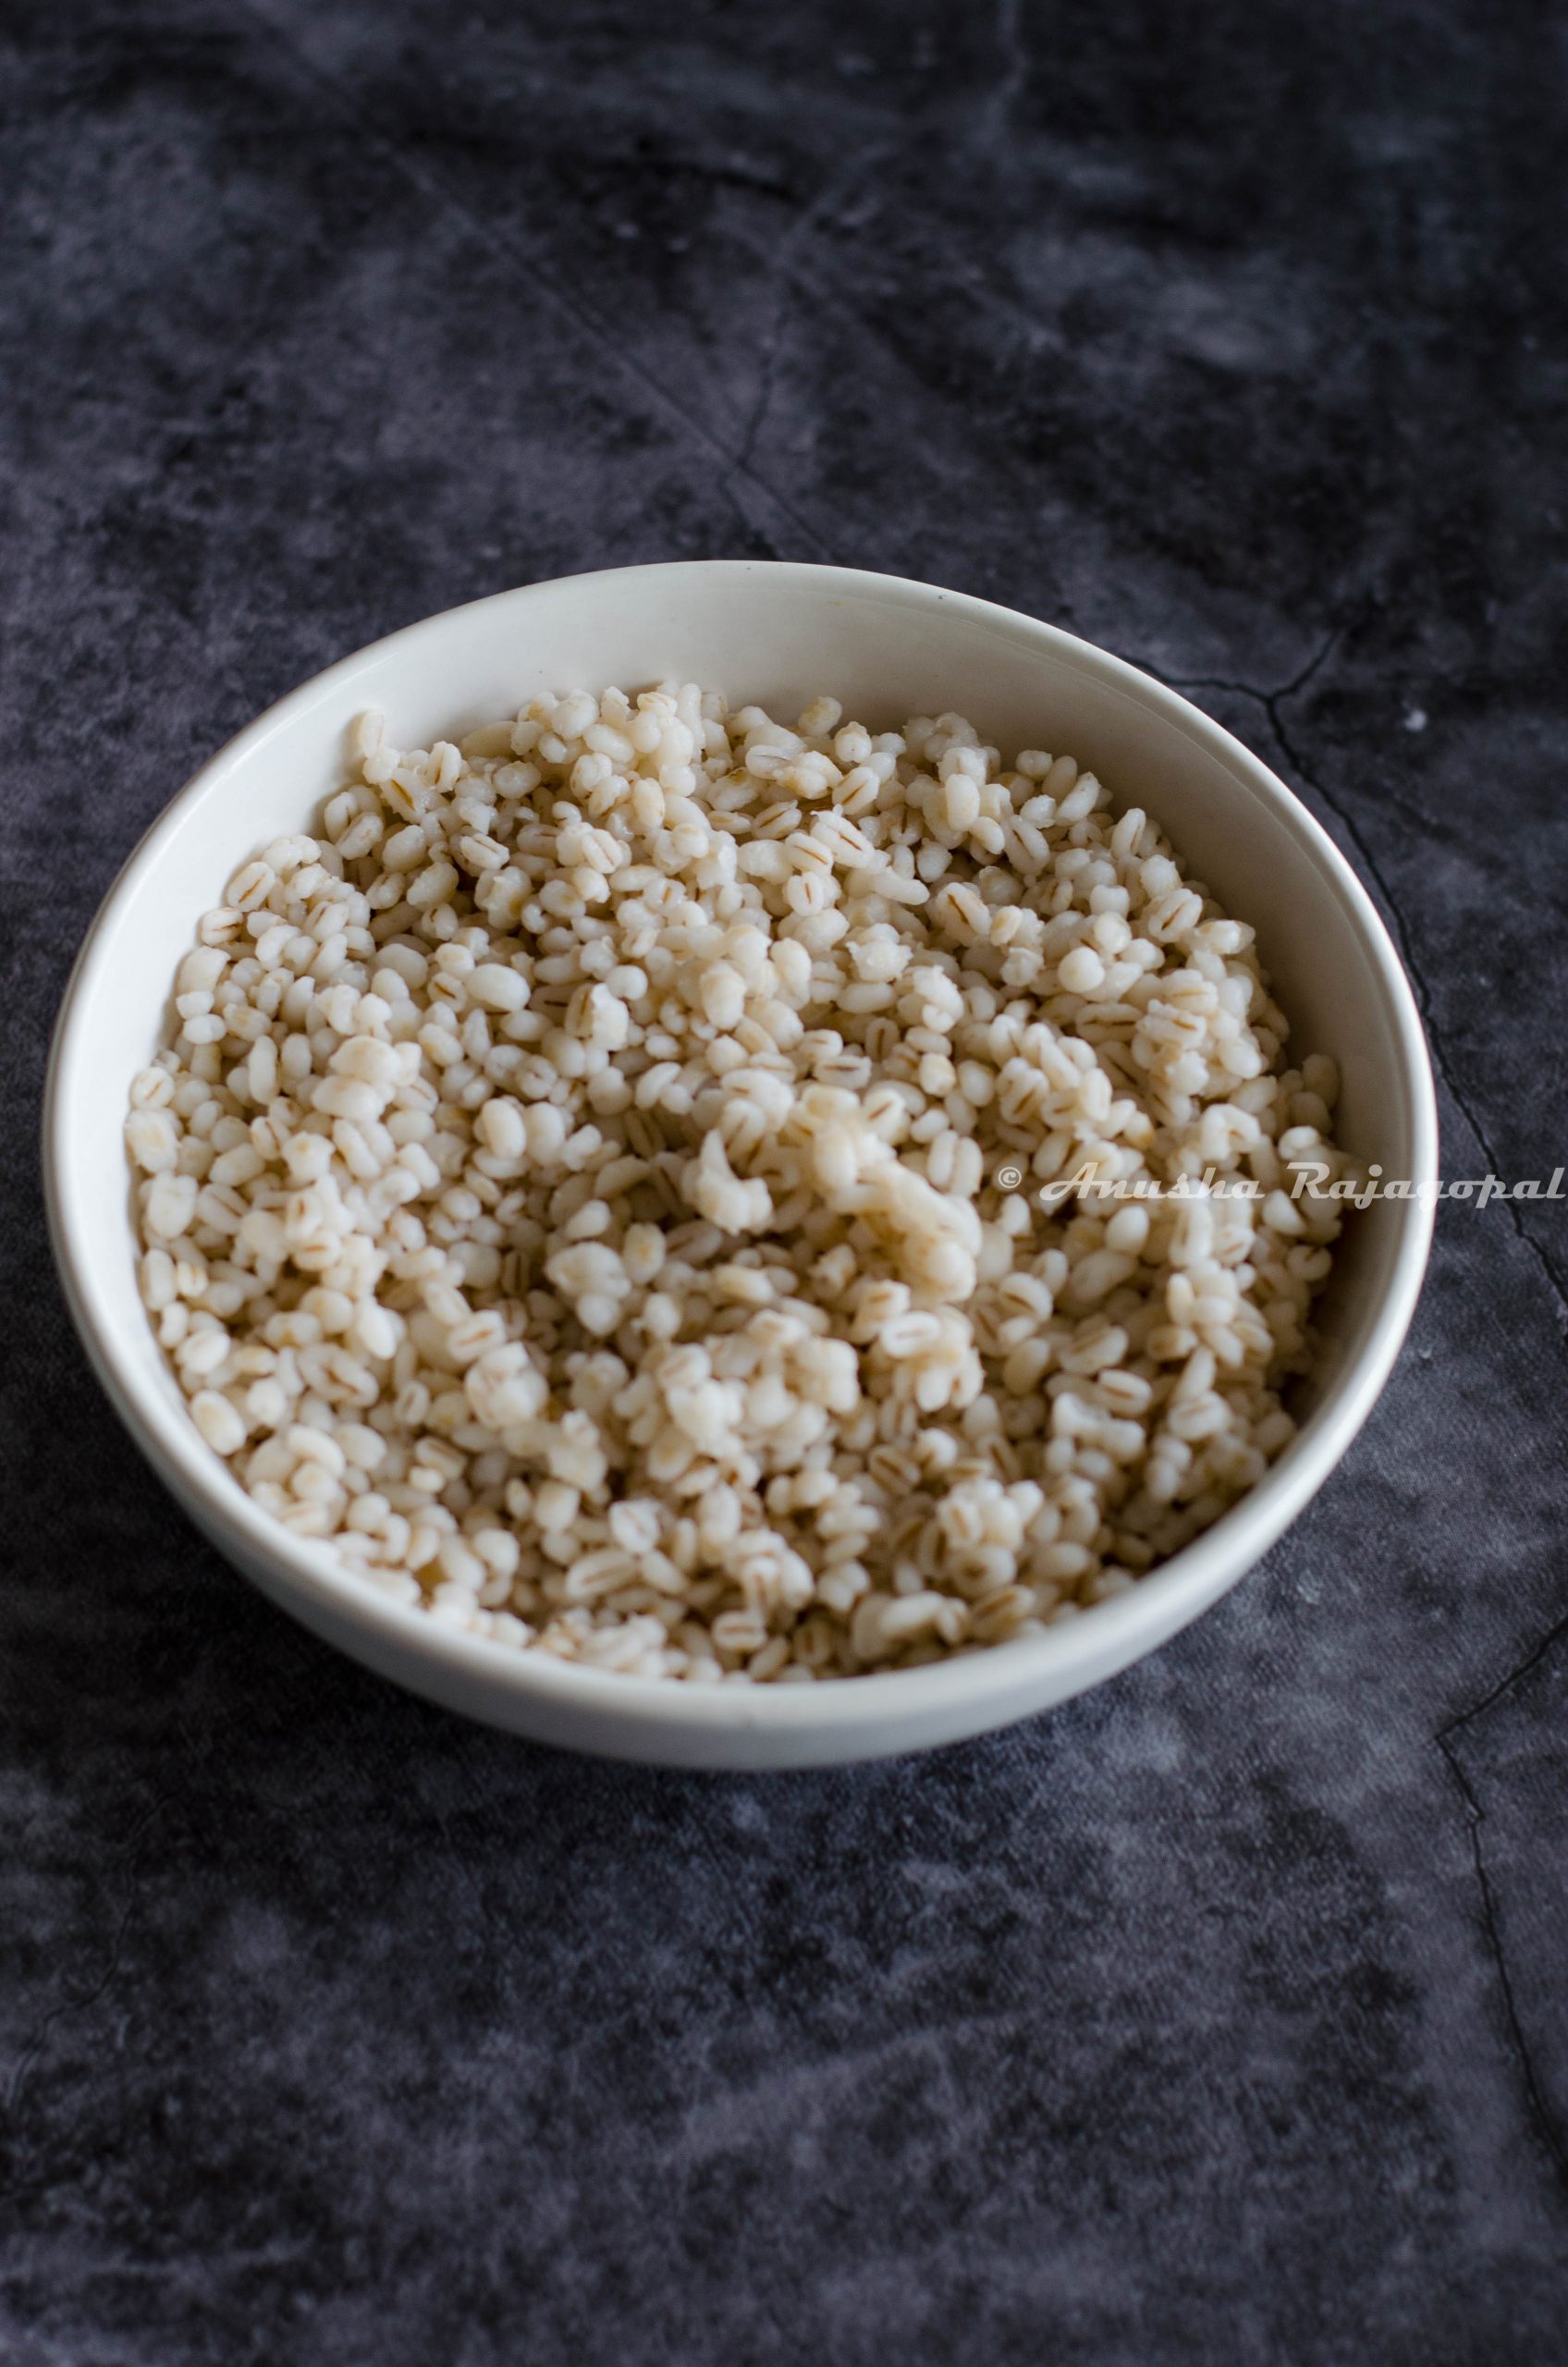 pearl barley cooked in instant pot and served in a white bowl placed over a grey backdrop